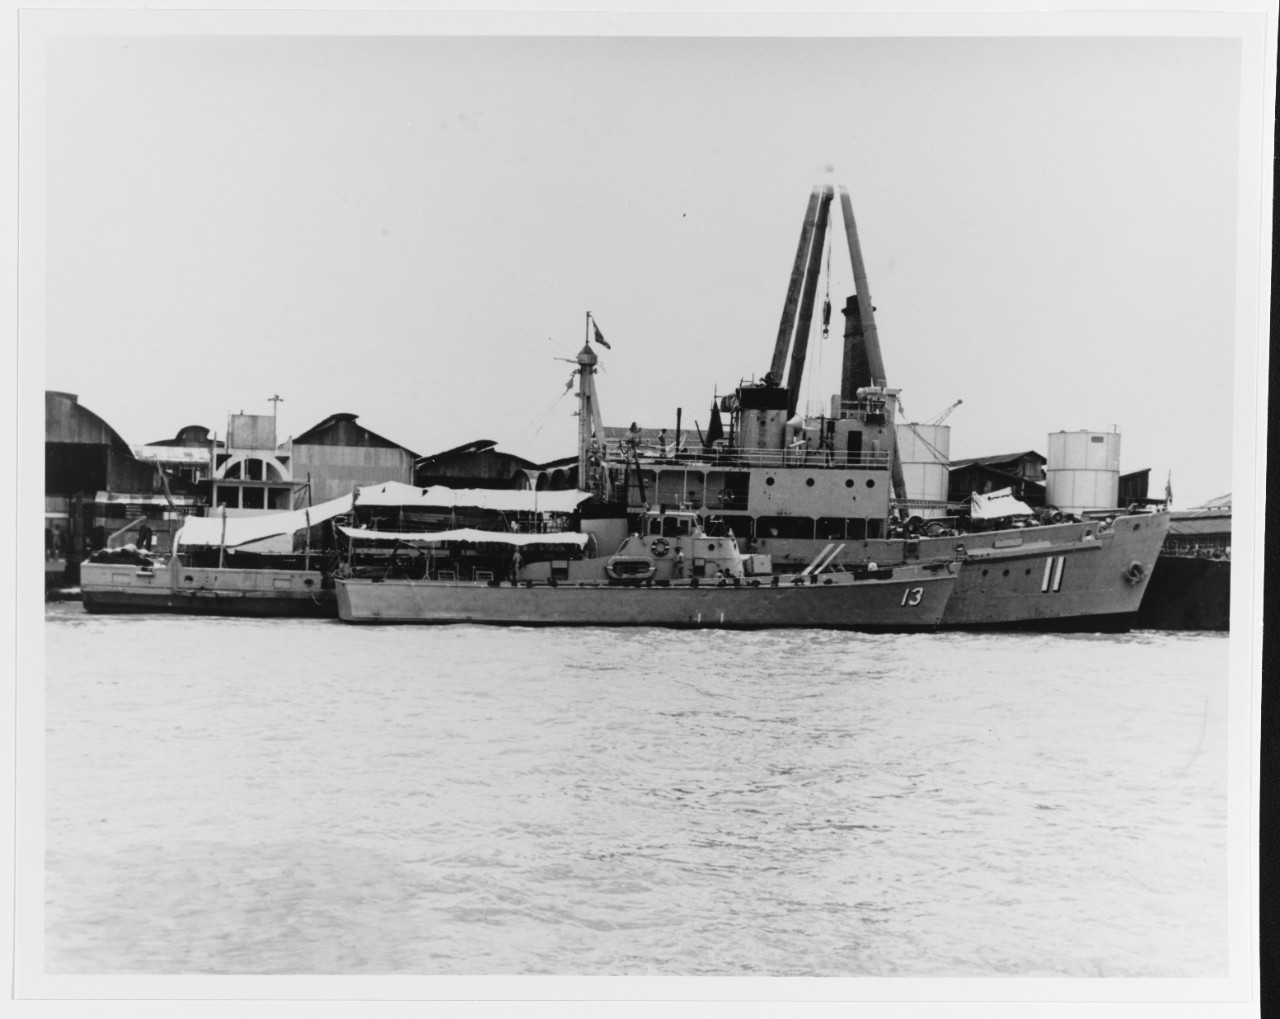 T-13 (Thai patrol vessel, 1968--), outboard, and RANG KWIEN (Thai mine countermeasures support ship, 1944-1979)